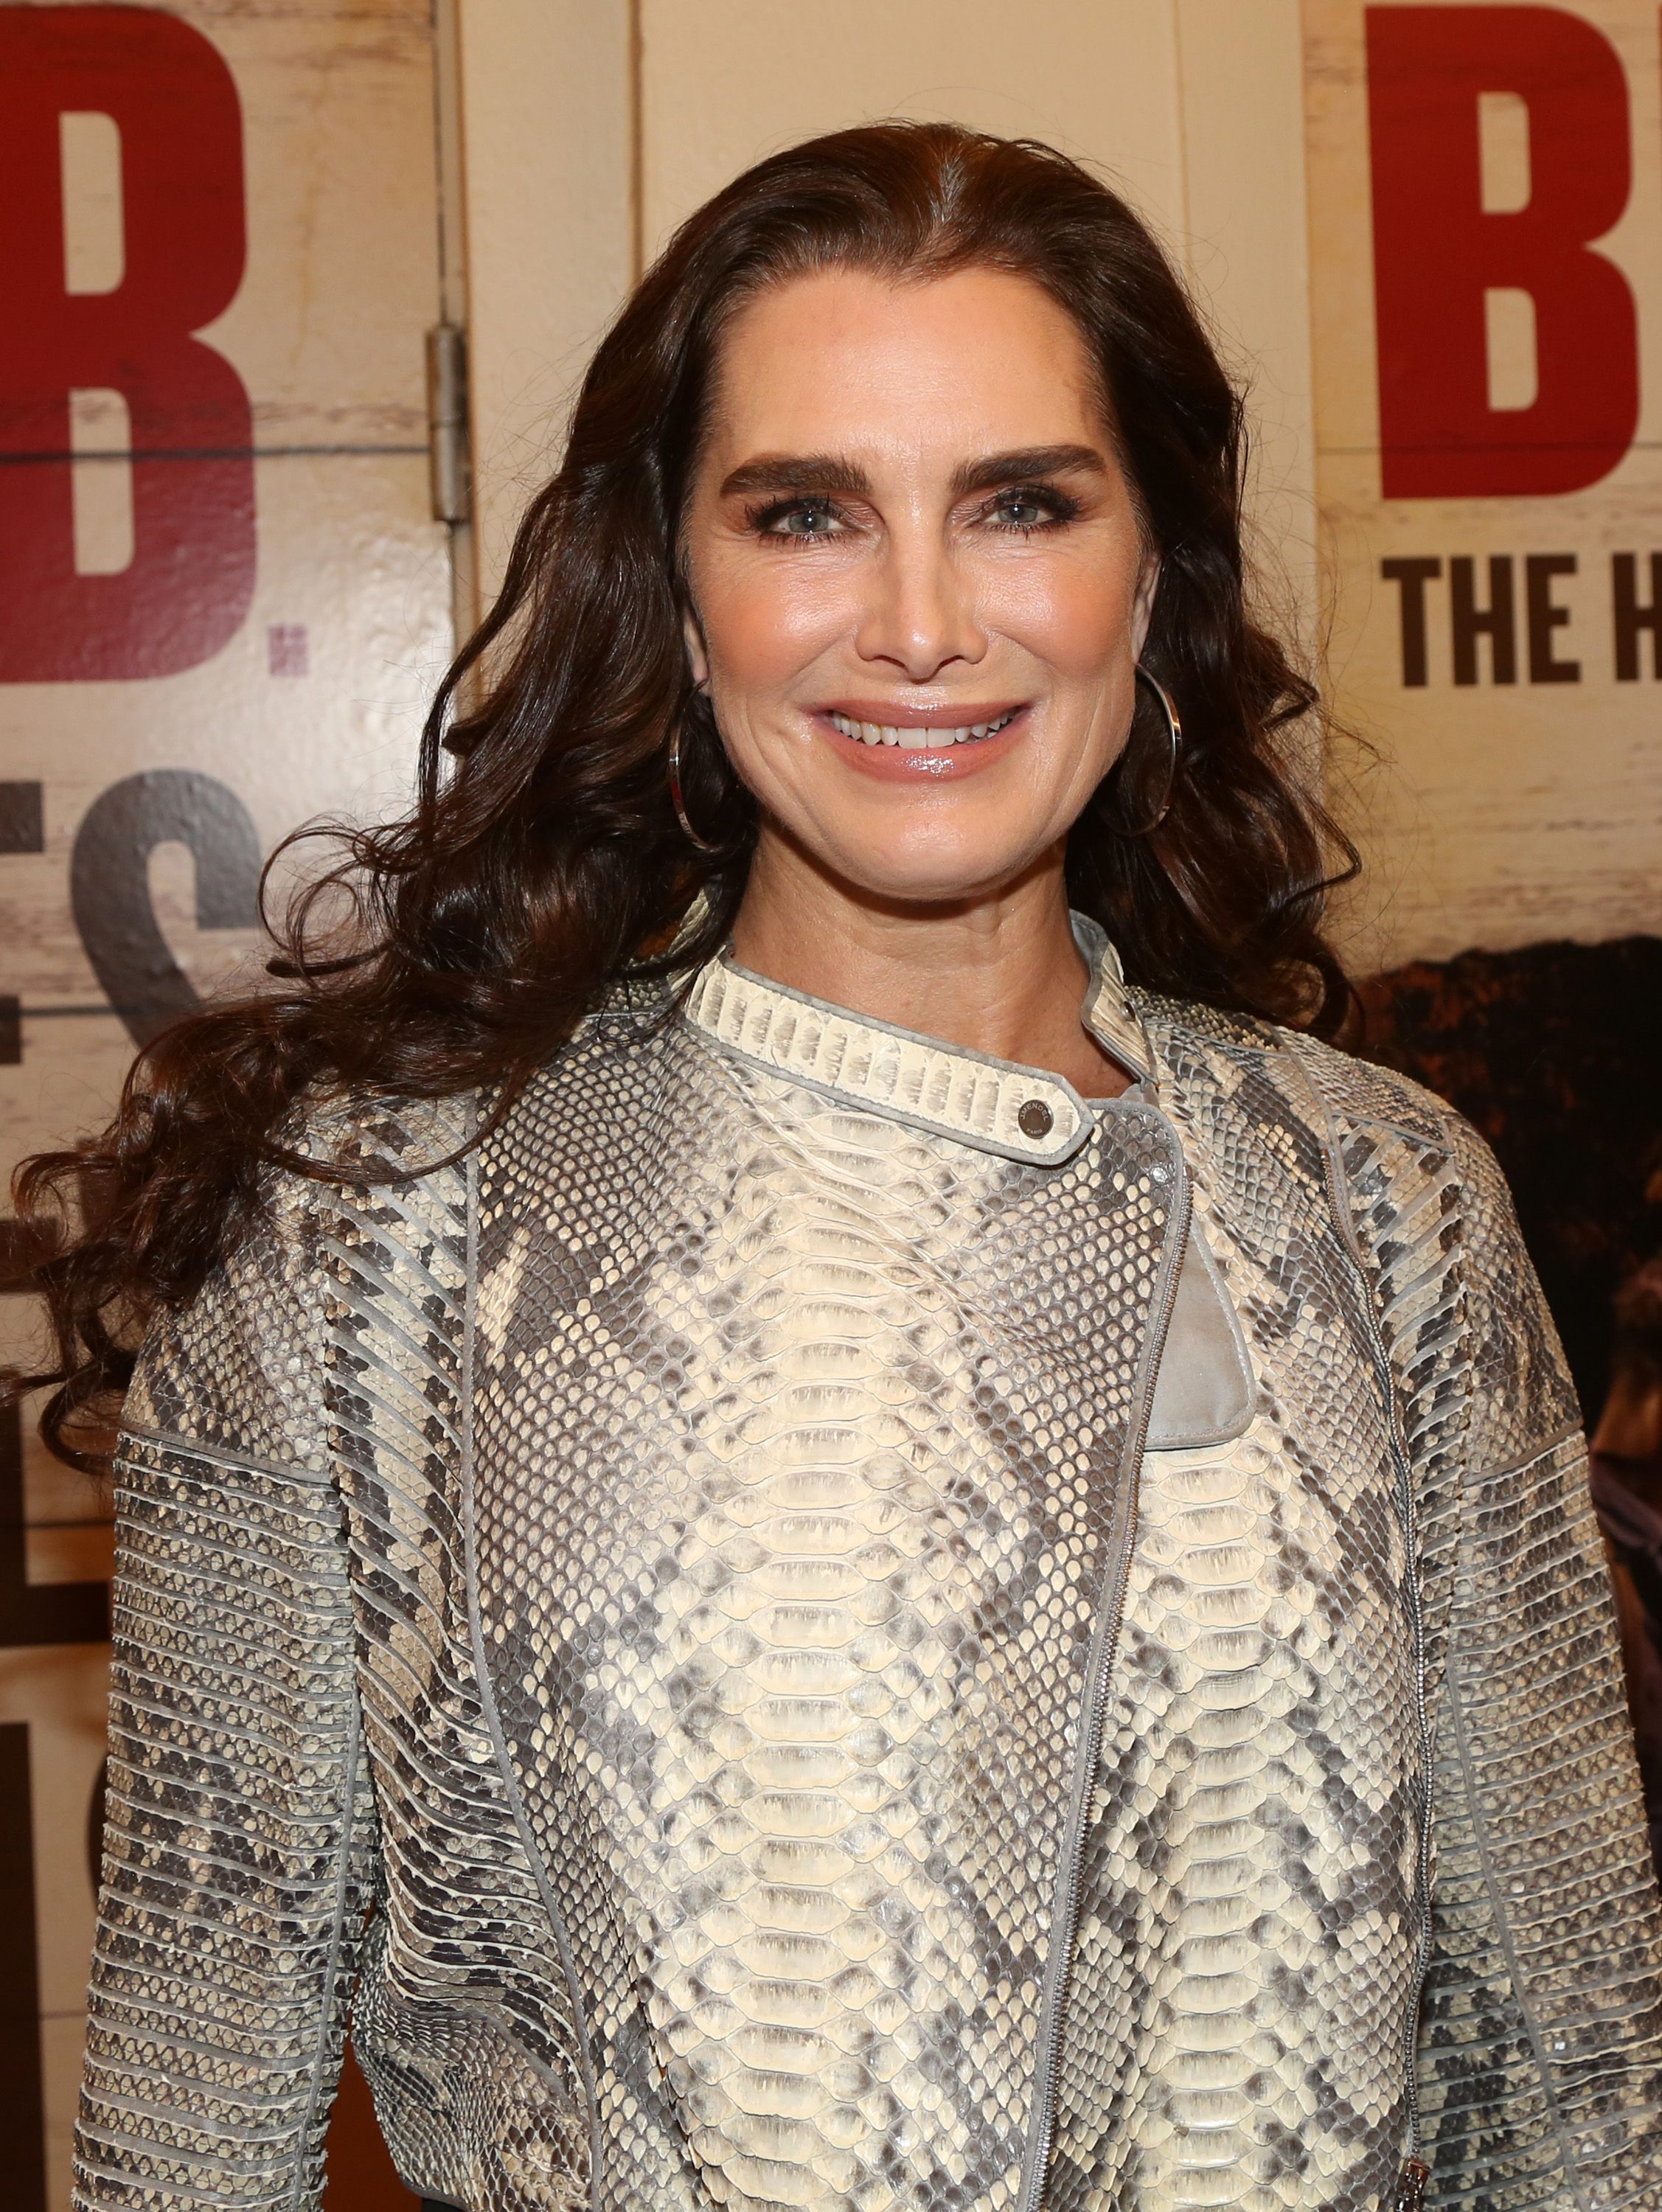 Brooke Shields poses at the opening night of the new Bob Dylan Musical "Girl From The North Country" on Broadway at The Belasco Theatre on March 5, 2020 | Photo: Getty Images